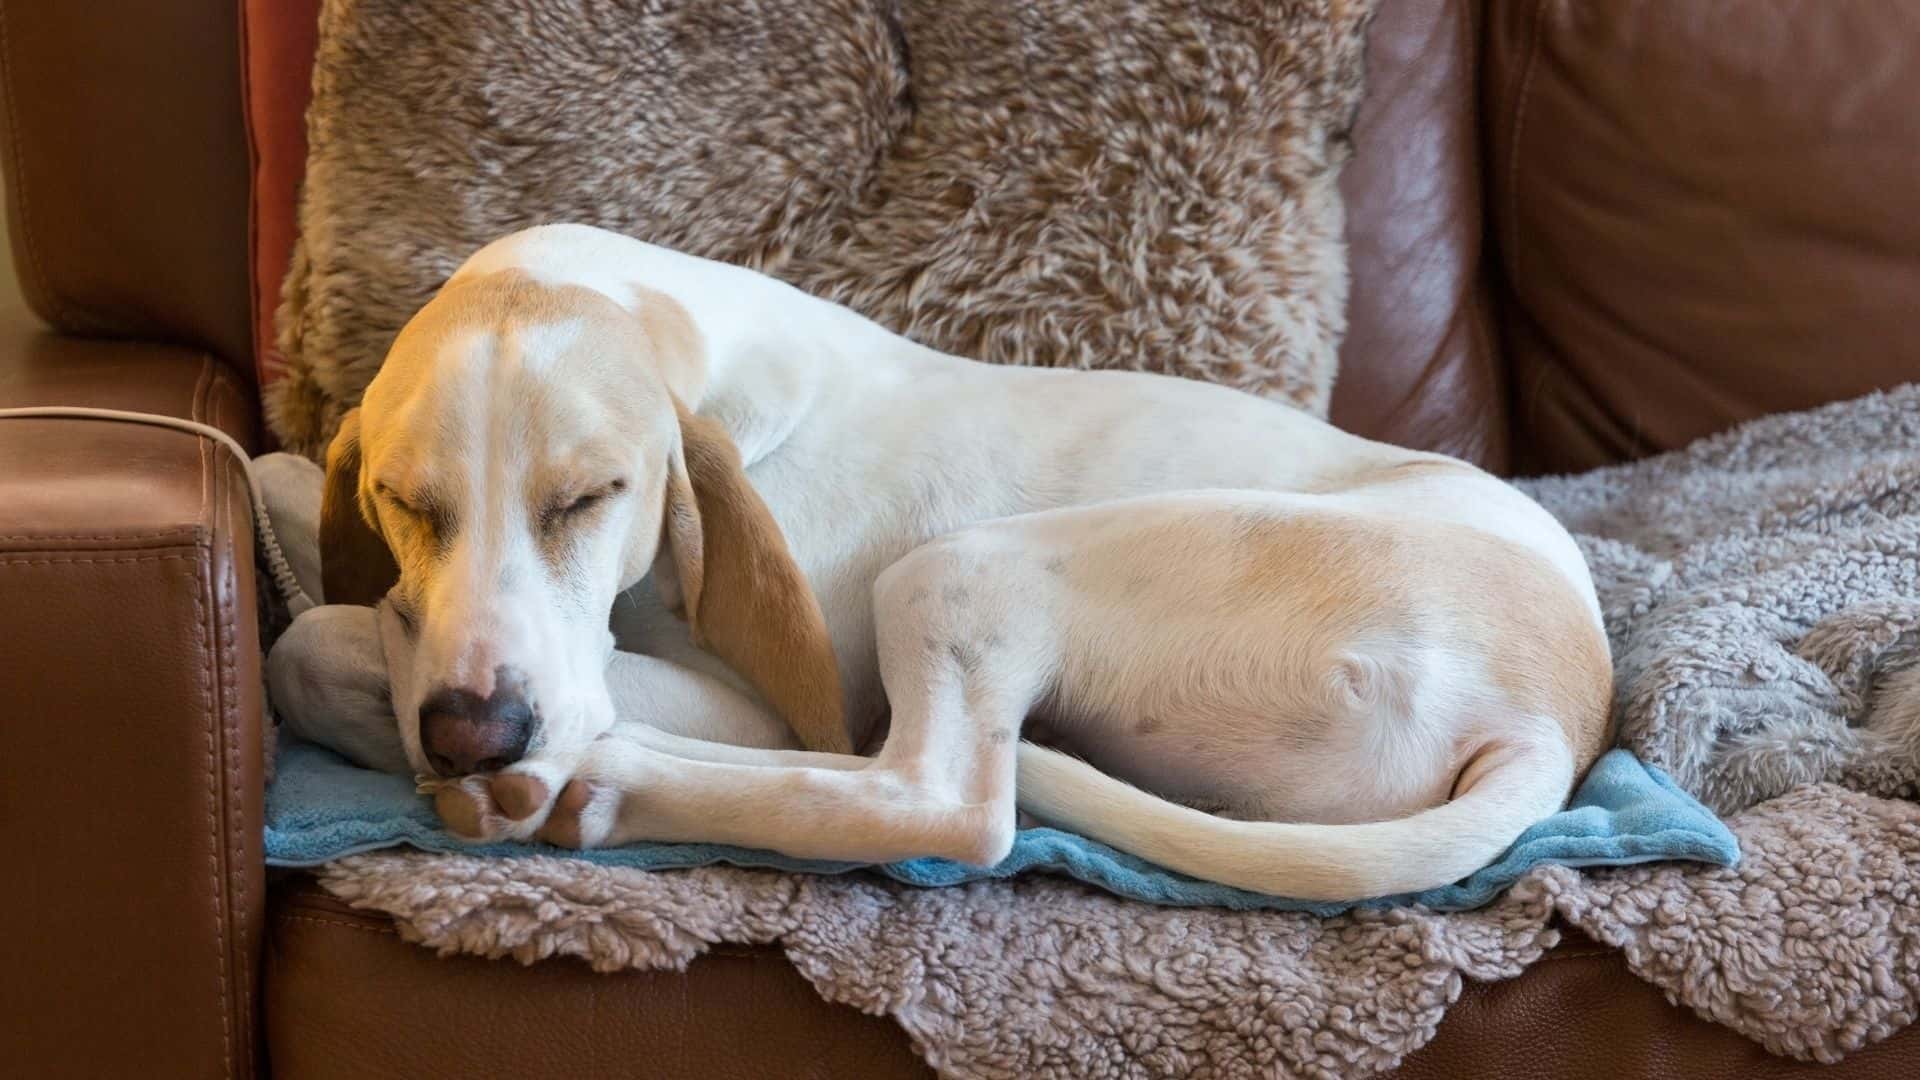 How to keep house clean when dog is in heat?